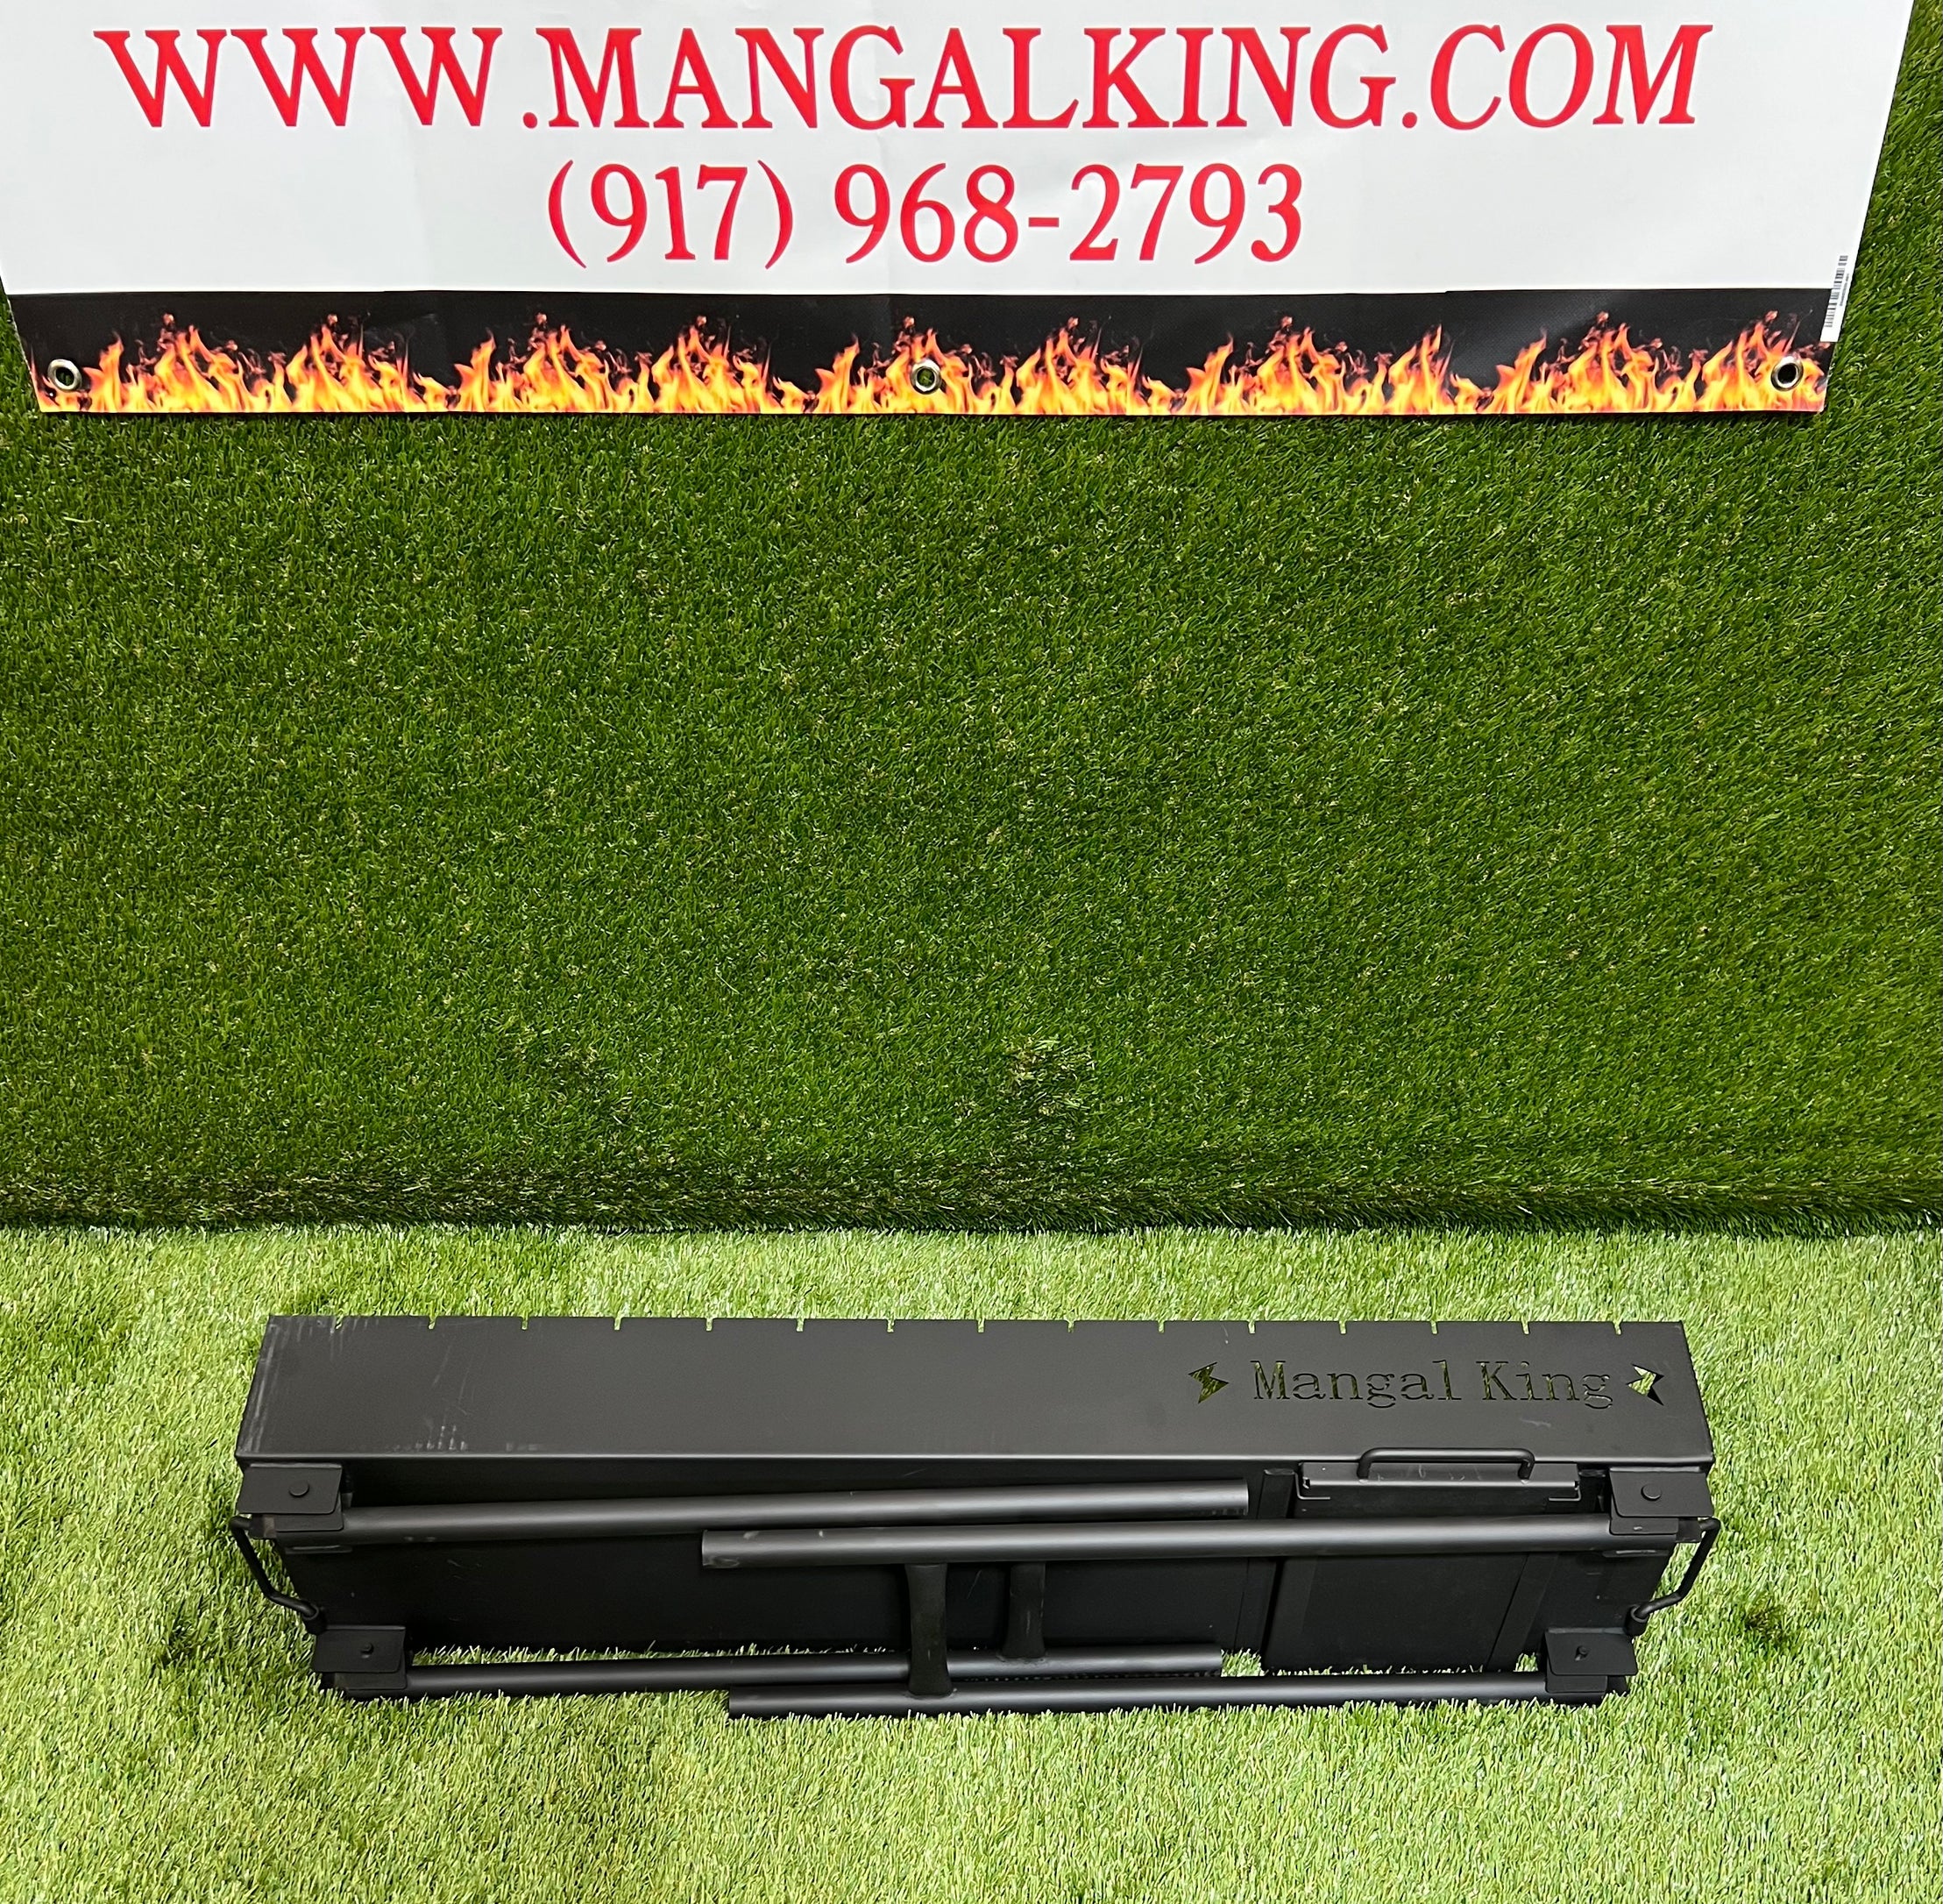 The Mangal King, Mangal portable charcoal grill with fold down legs 1 meter long